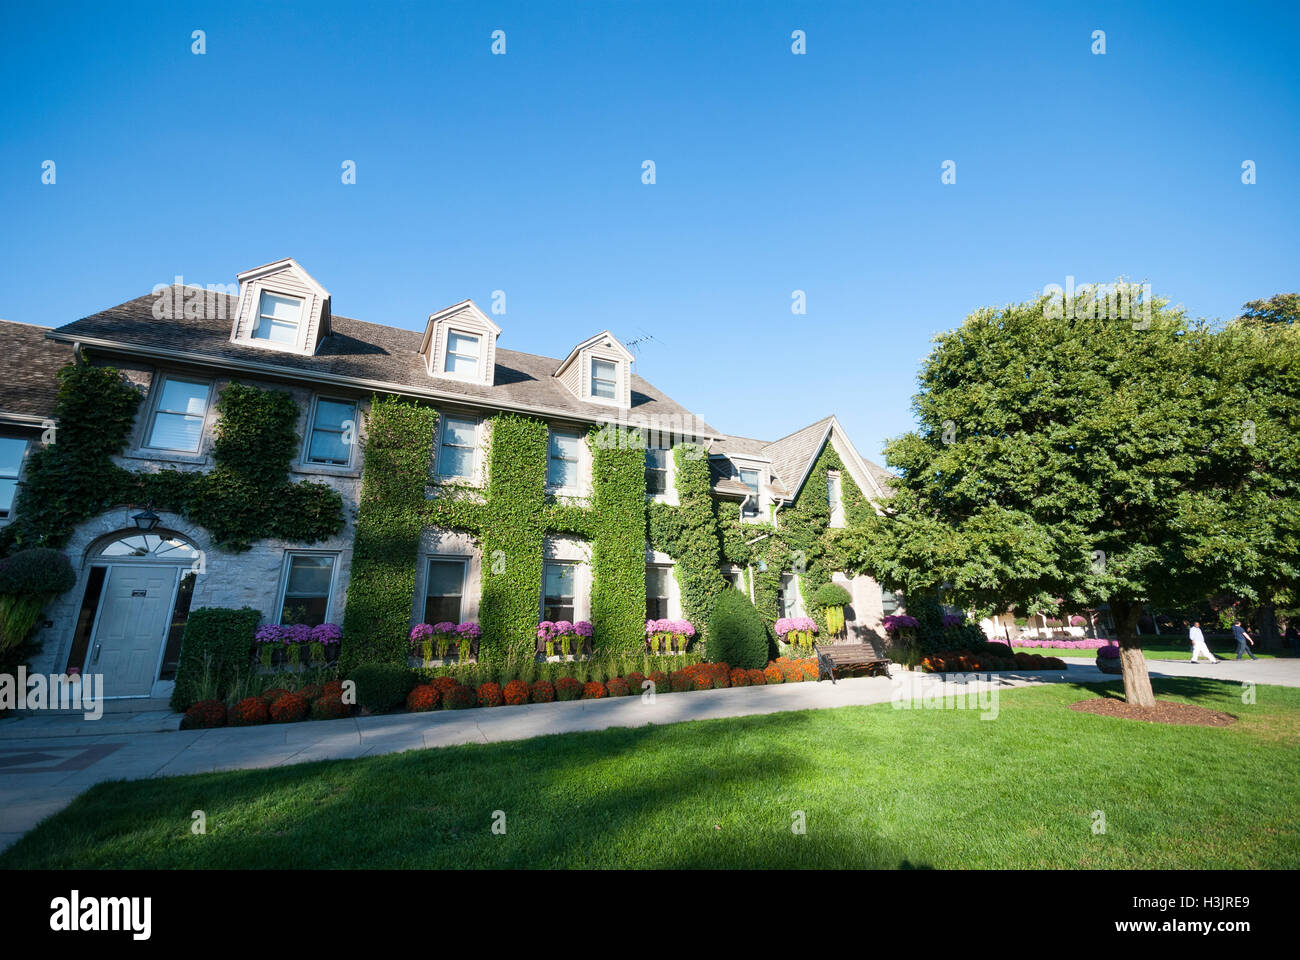 The ivy covered student residence at the Niagara Parks School of Horticulture at the Niagara parks botanical gardens Stock Photo